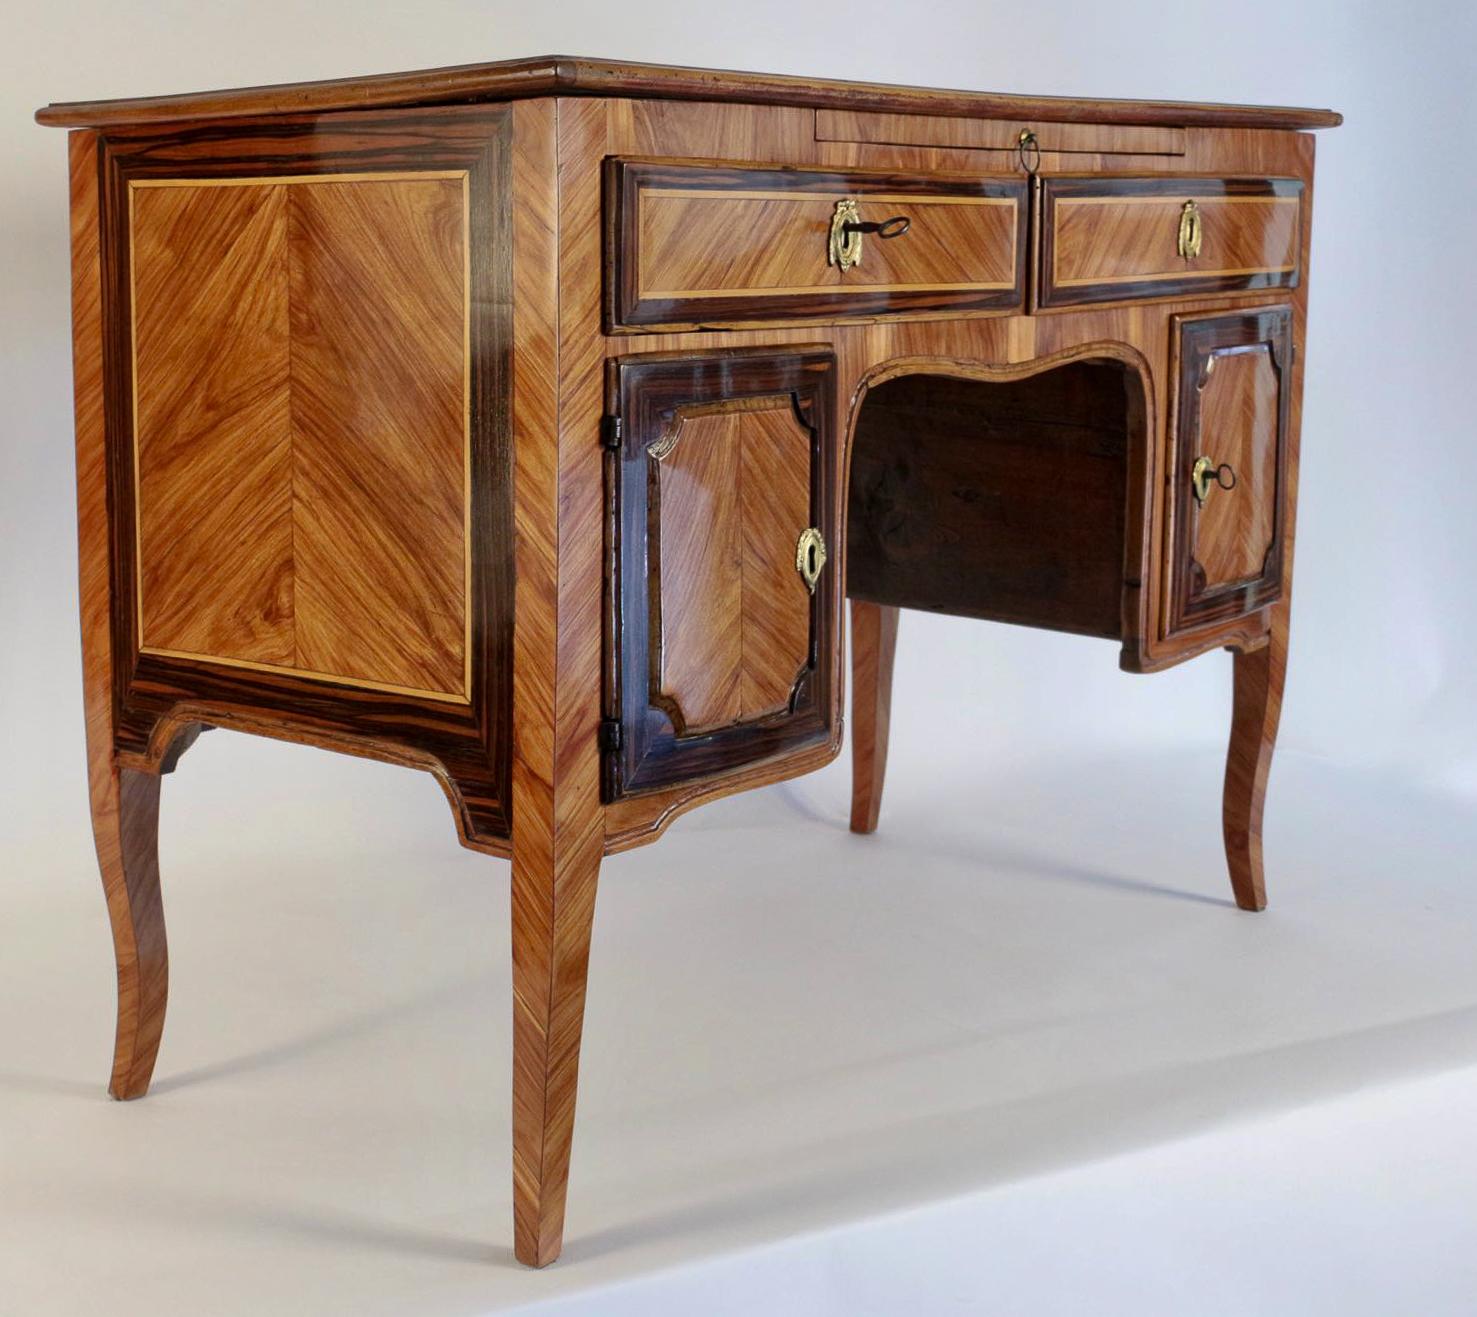 Italian Flat-Top Desk, Mid-18th Century, circa 1750-1760 In Good Condition For Sale In Saint Ouen, FR